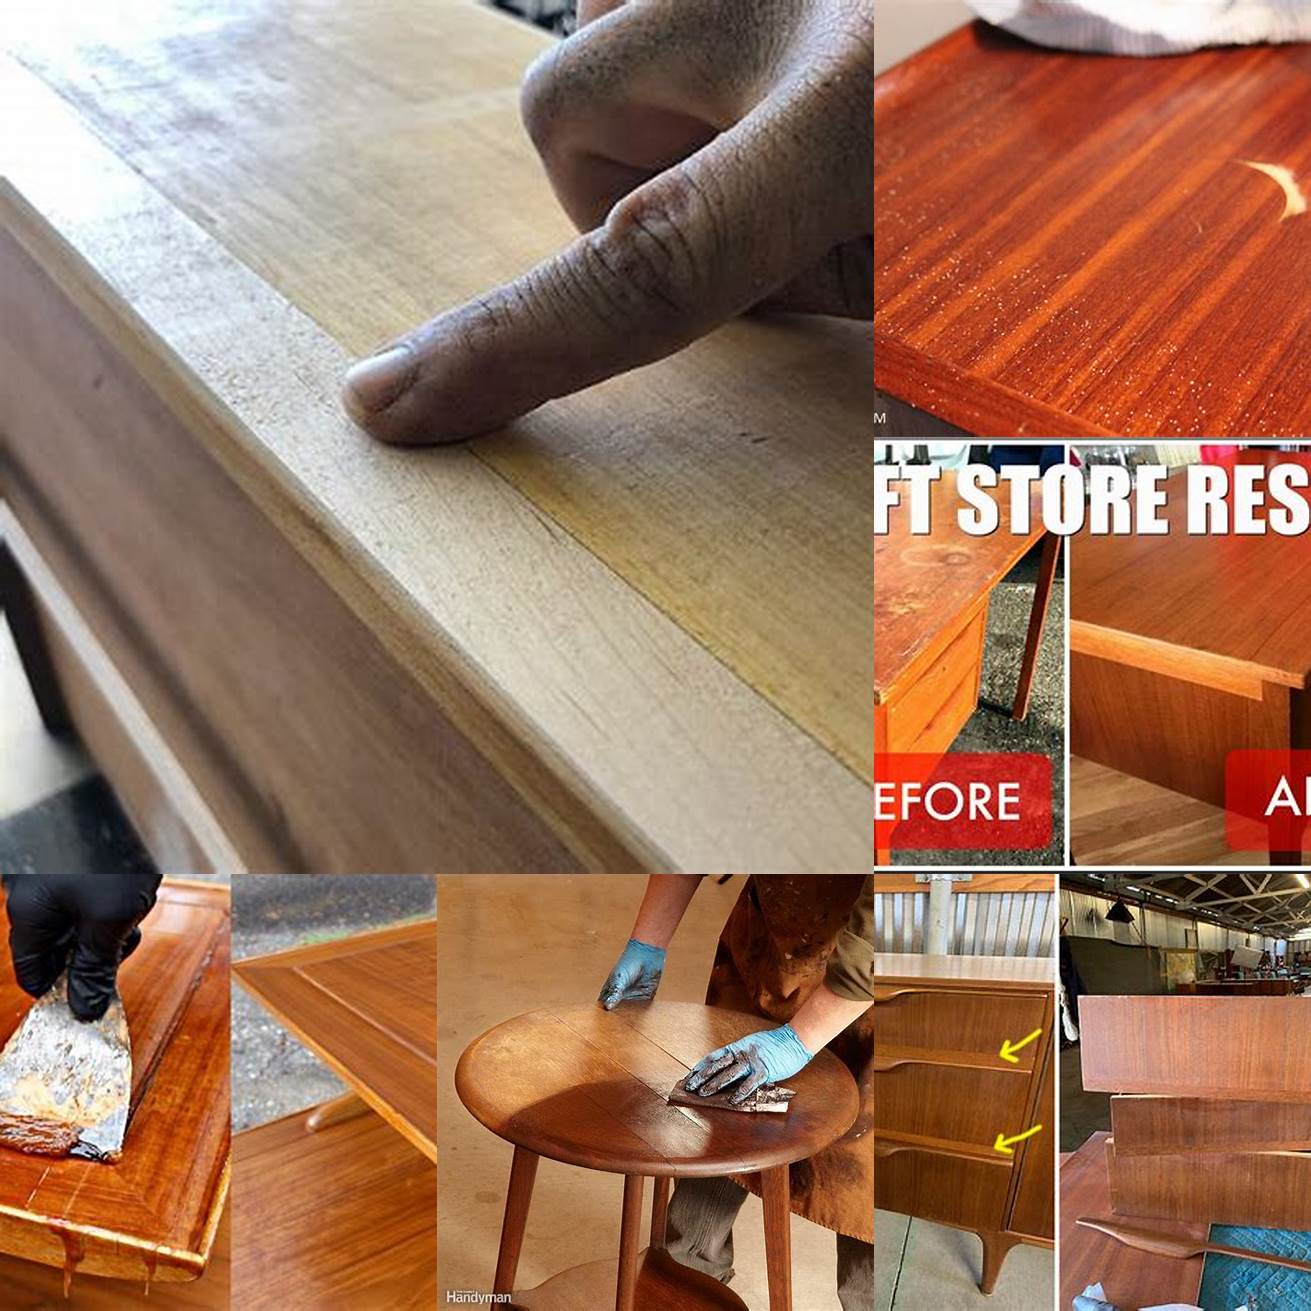 A picture of teak furniture being repaired